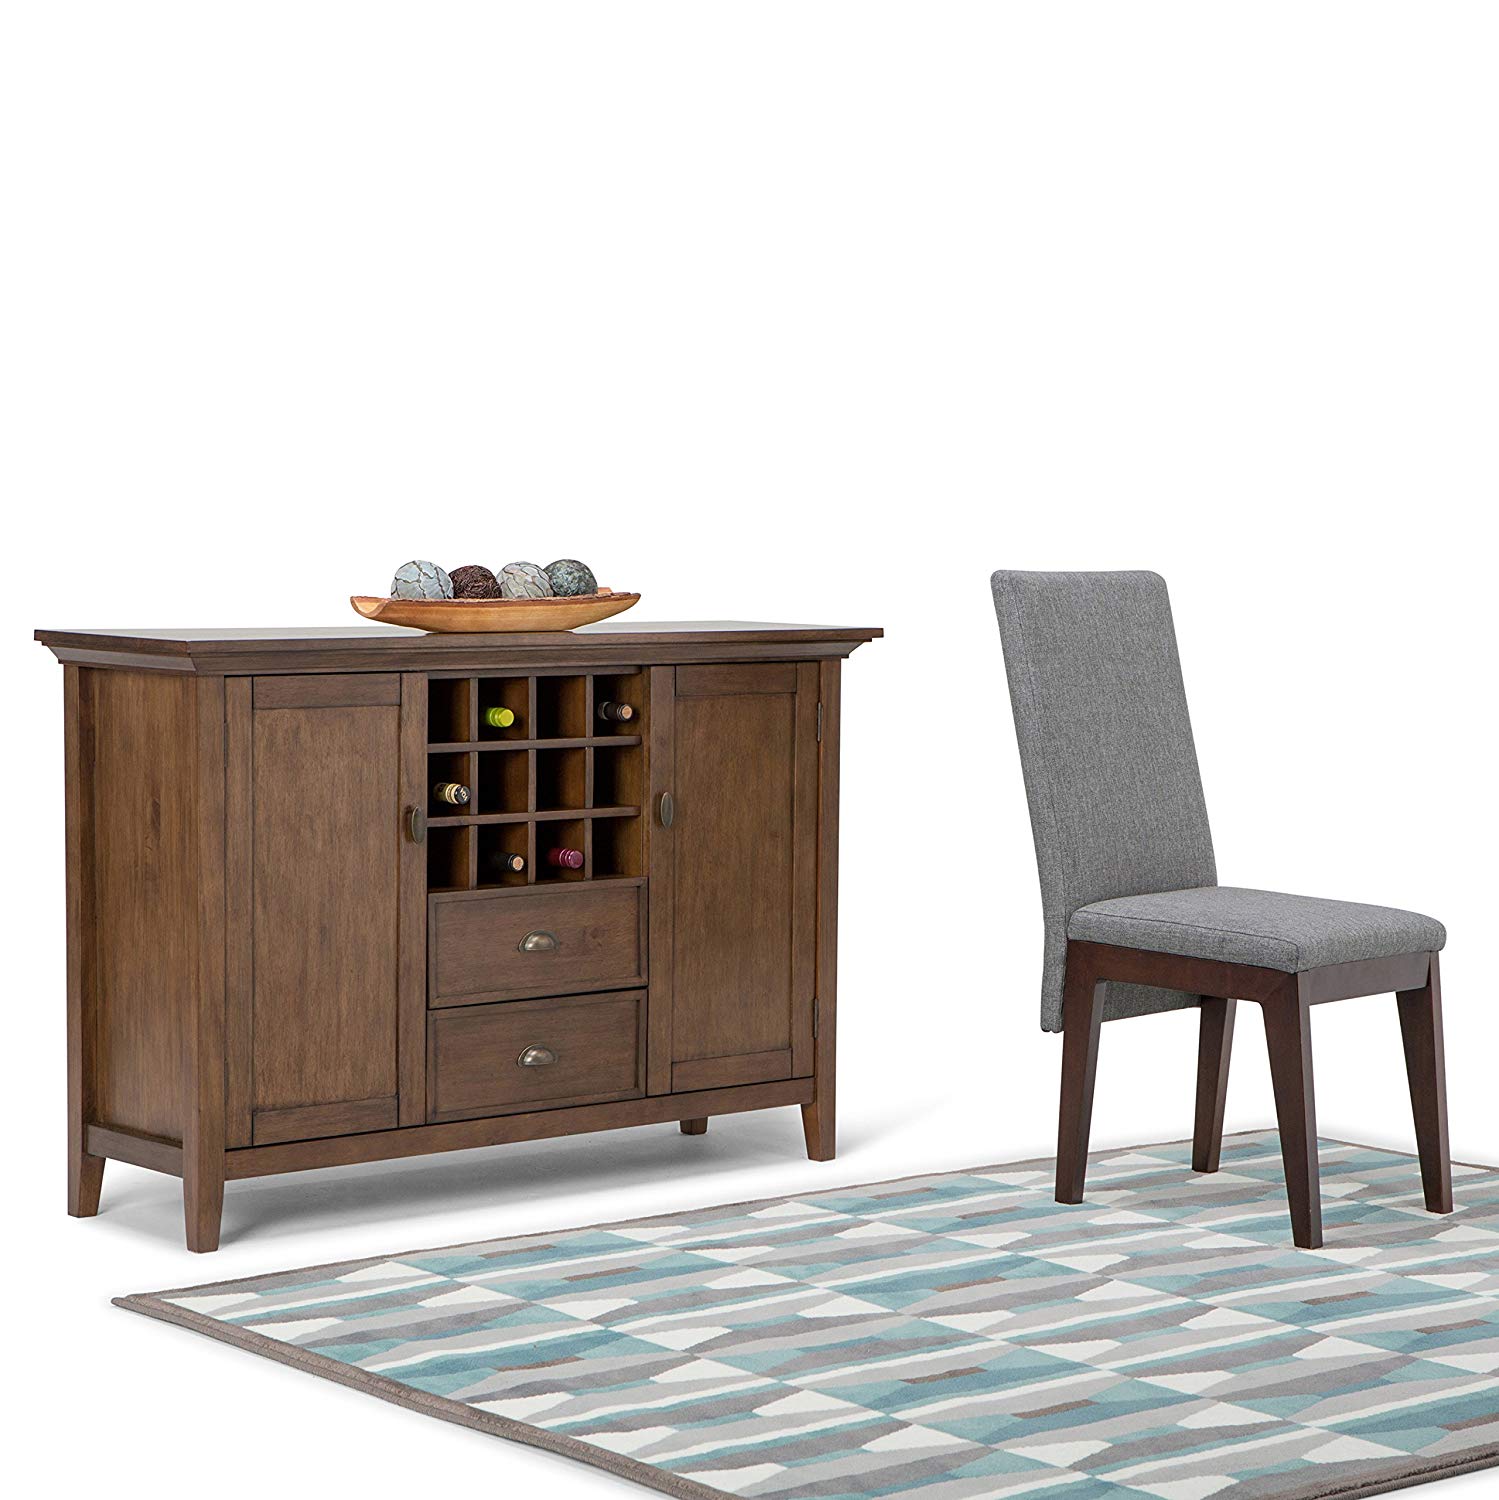 simpli home redmond solid wood sideboard avenue six piece chair and accent table set buffet credenza winerack rustic natural aged brown kitchen dining unfinished furniture the